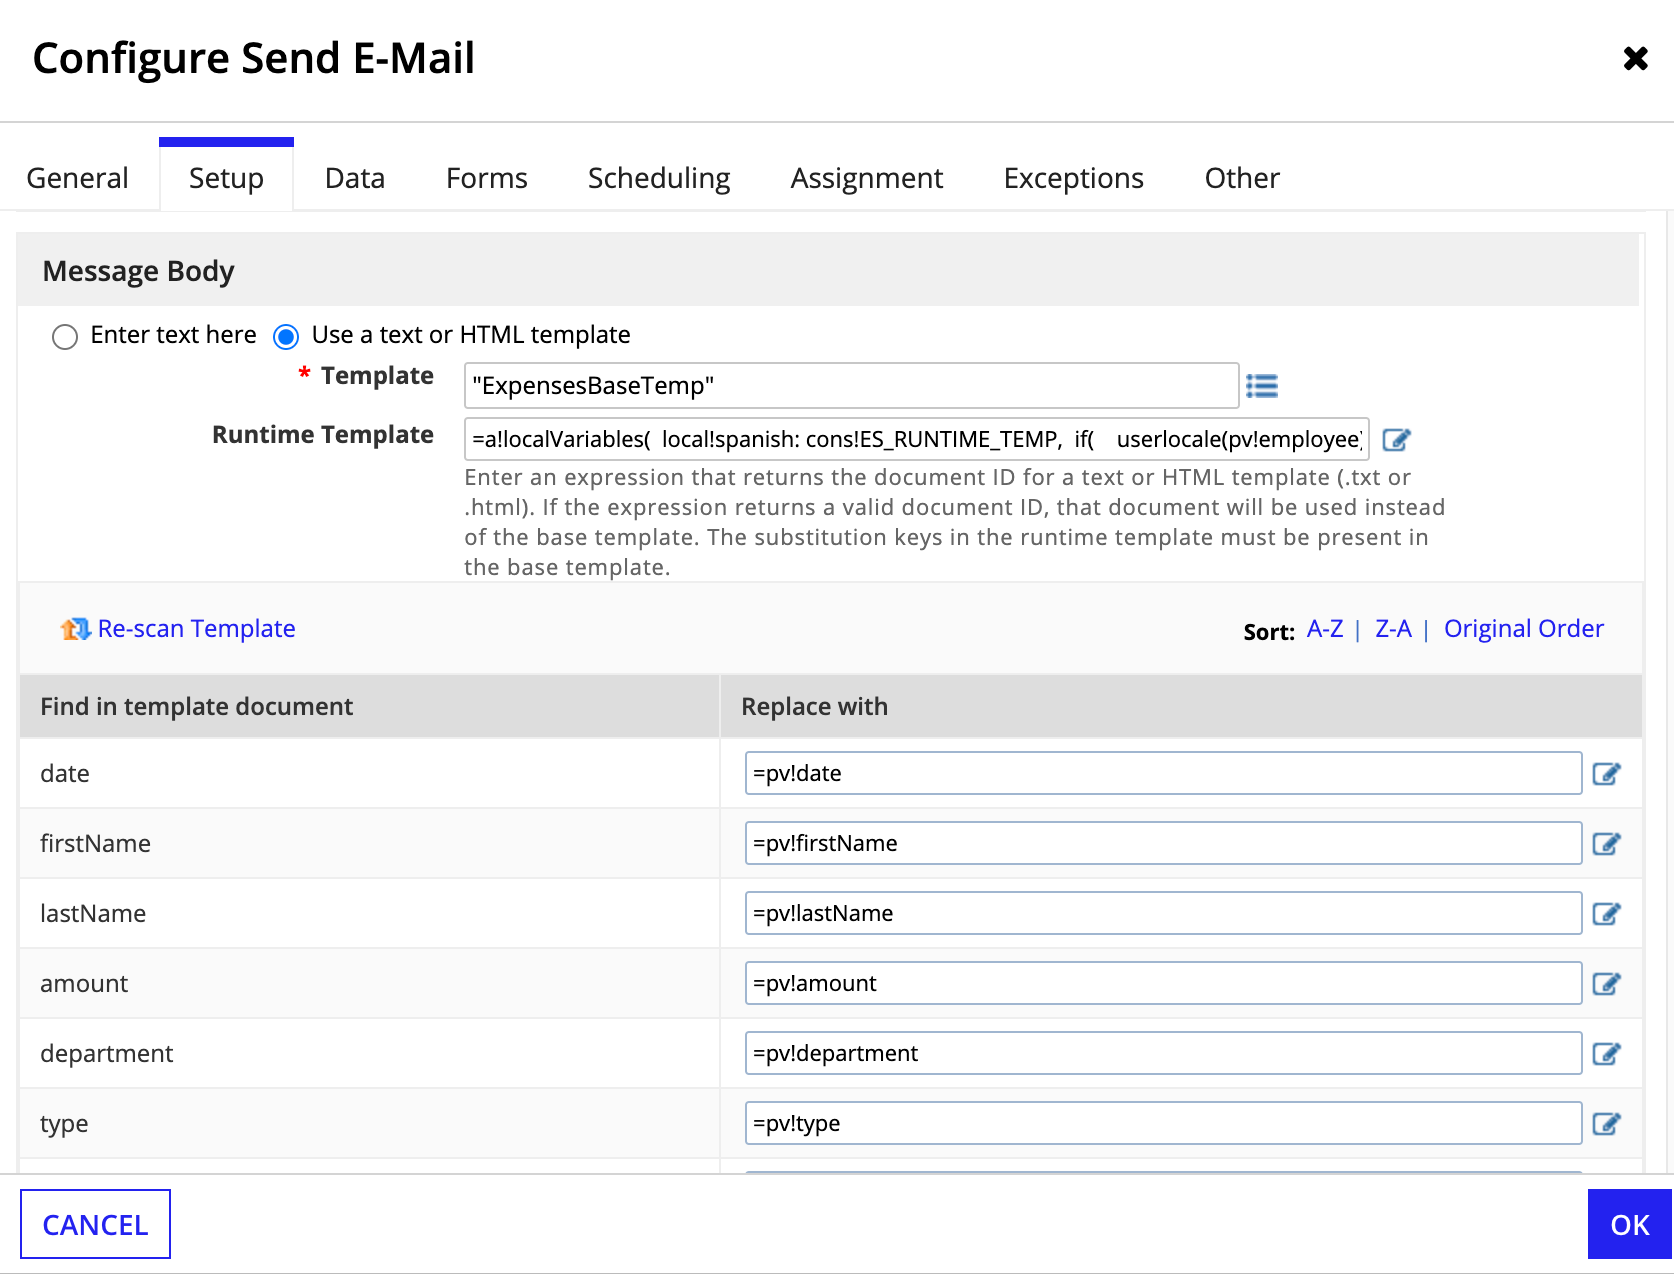 images/configure_send_email.png